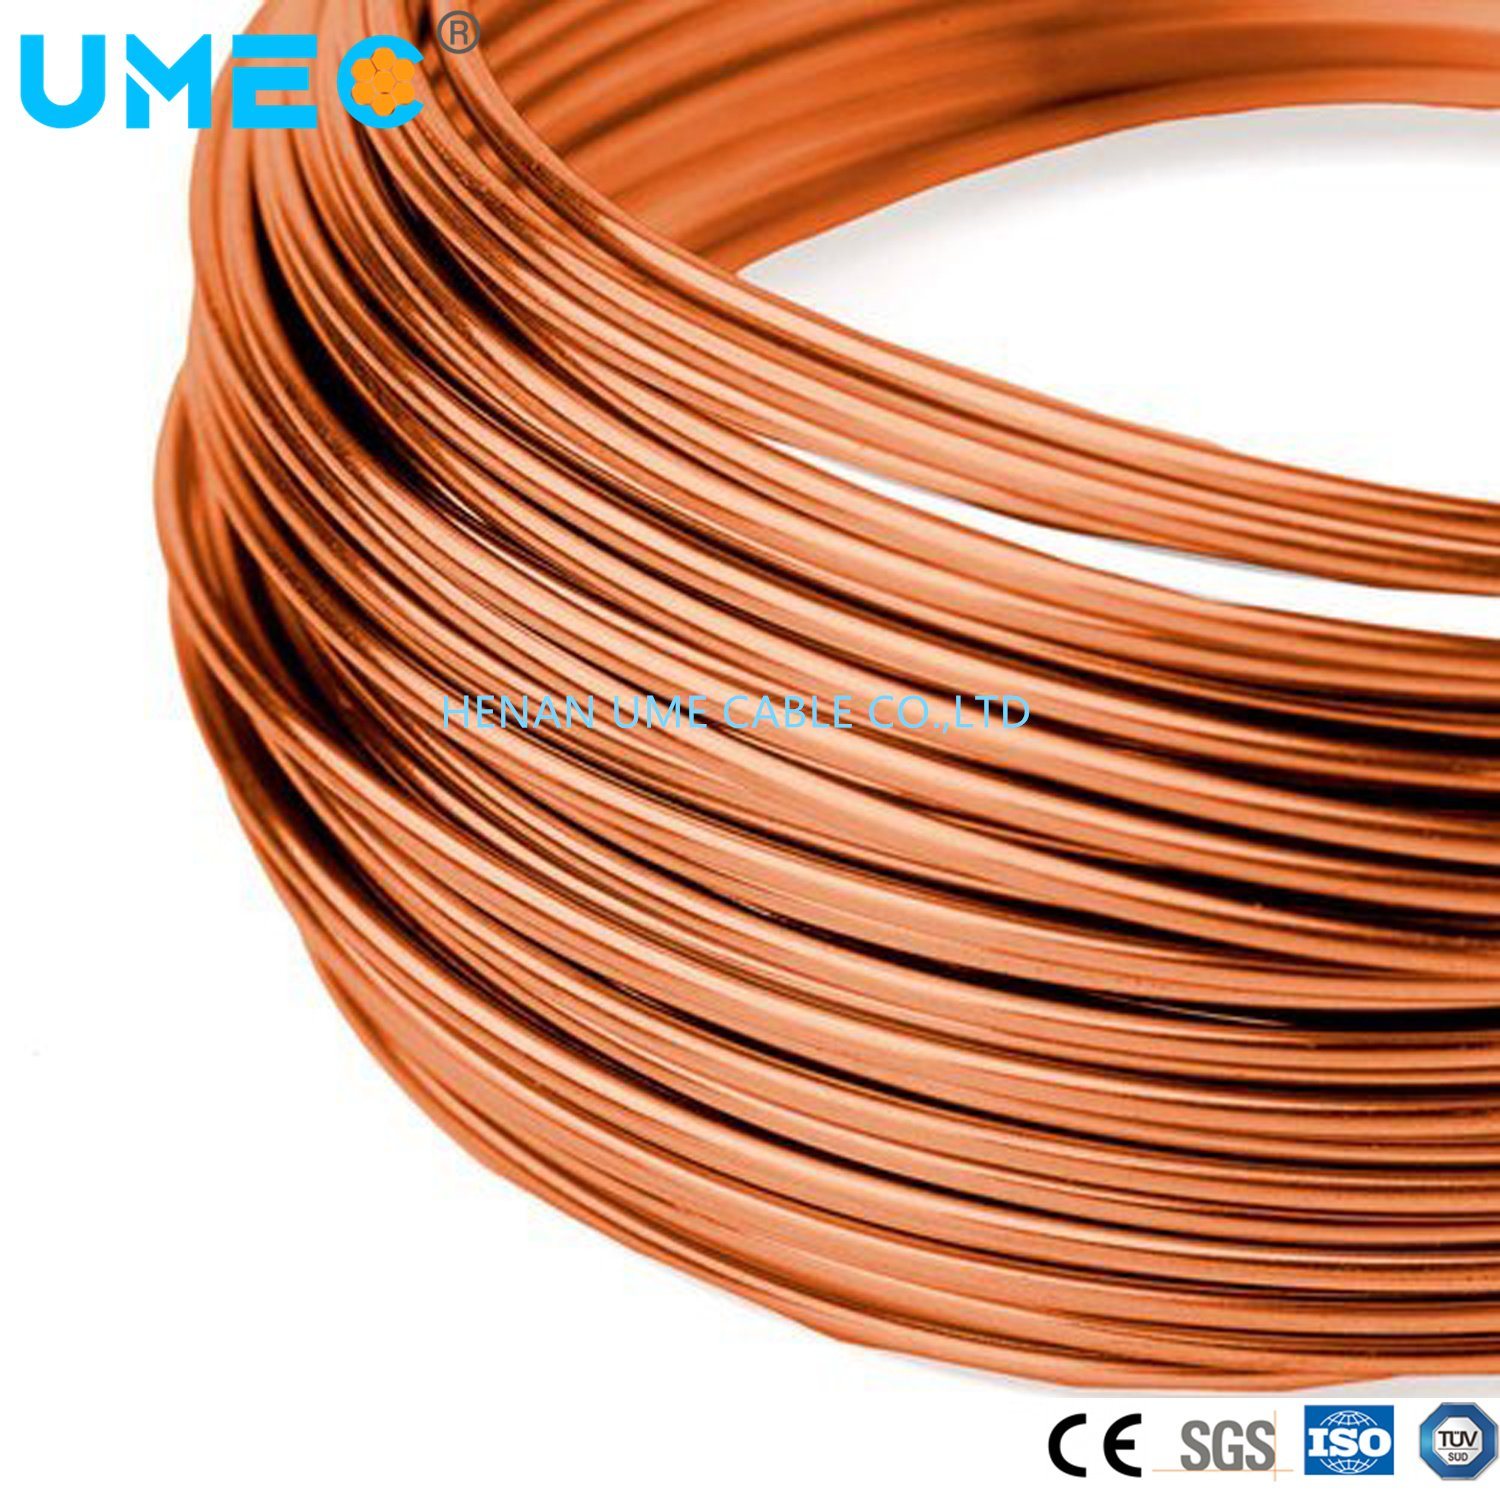 180 Grade Round Enameled Copper Winding Wire for Motor Coil Rewinding 24 22 20AWG Electric Metallic Conductor